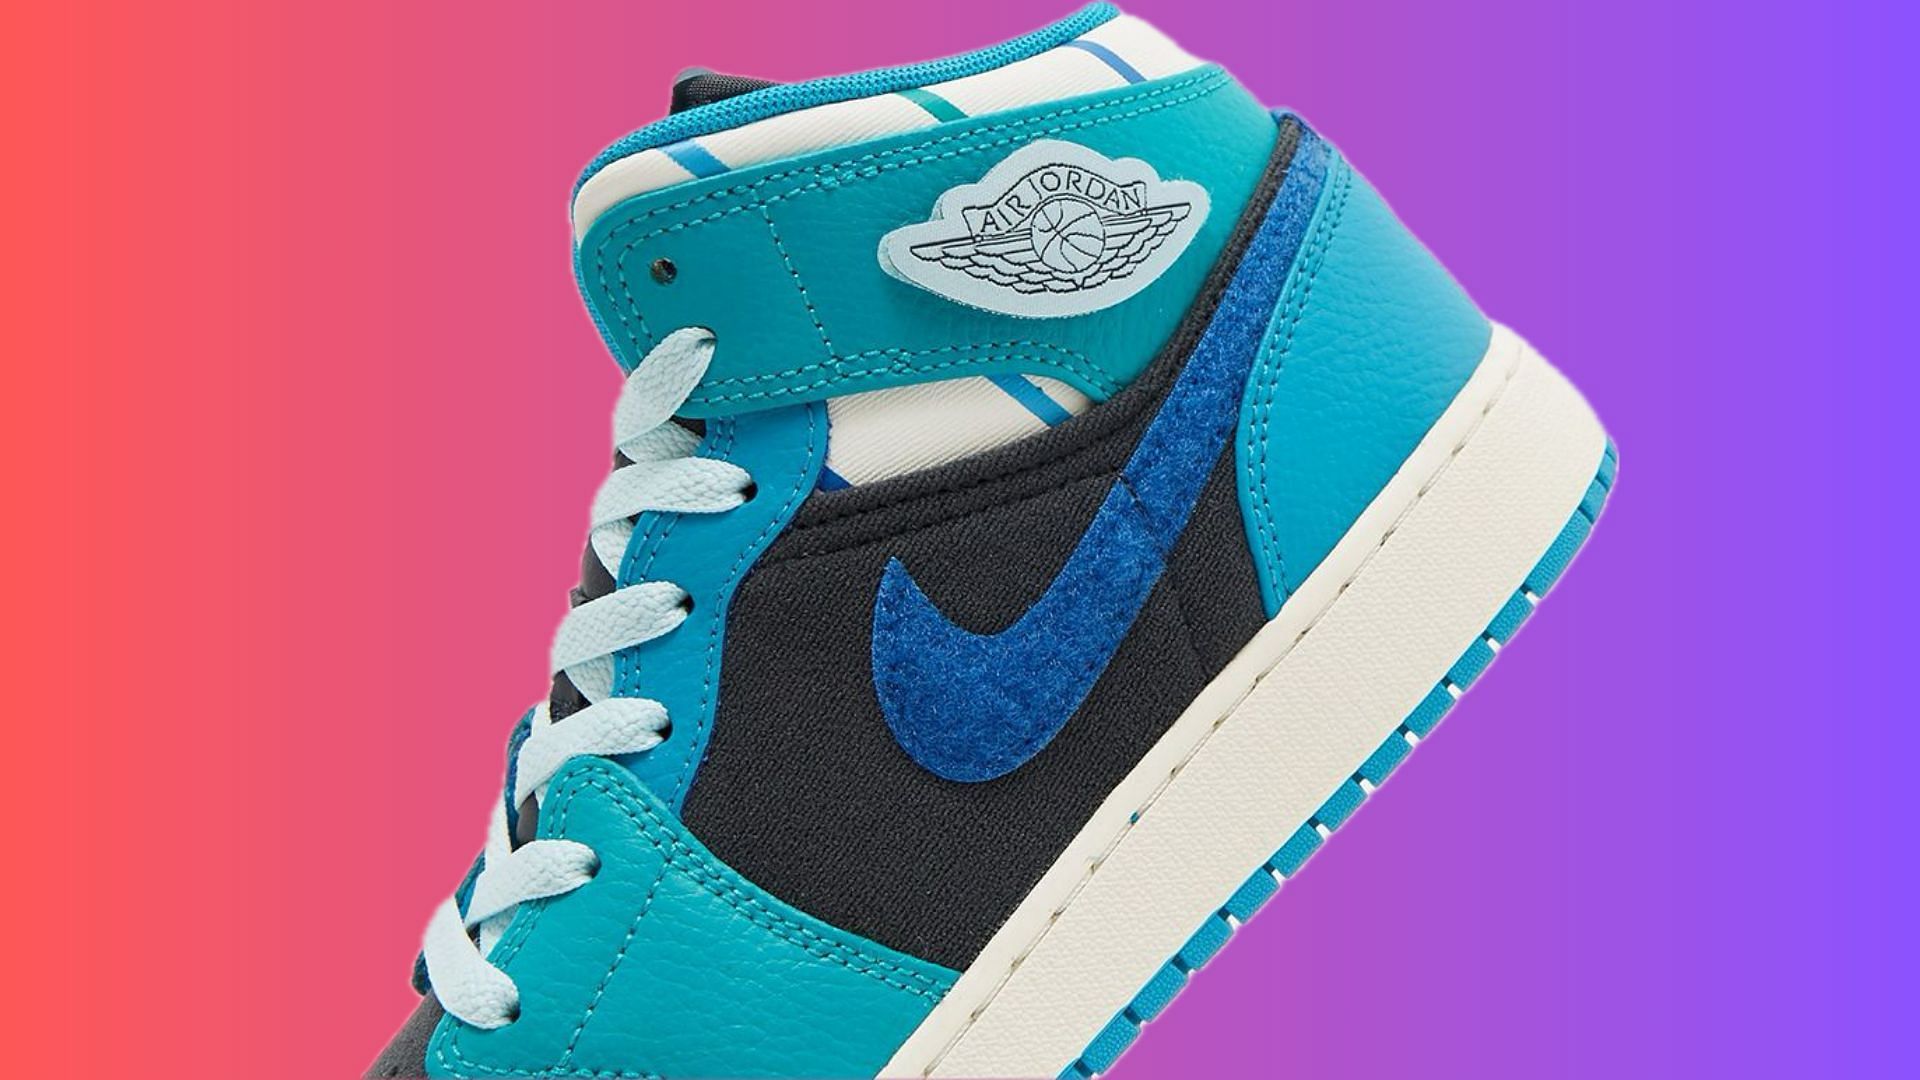 Nike: Air Jordan 1 Mid “Inspired by the Greatest” shoes